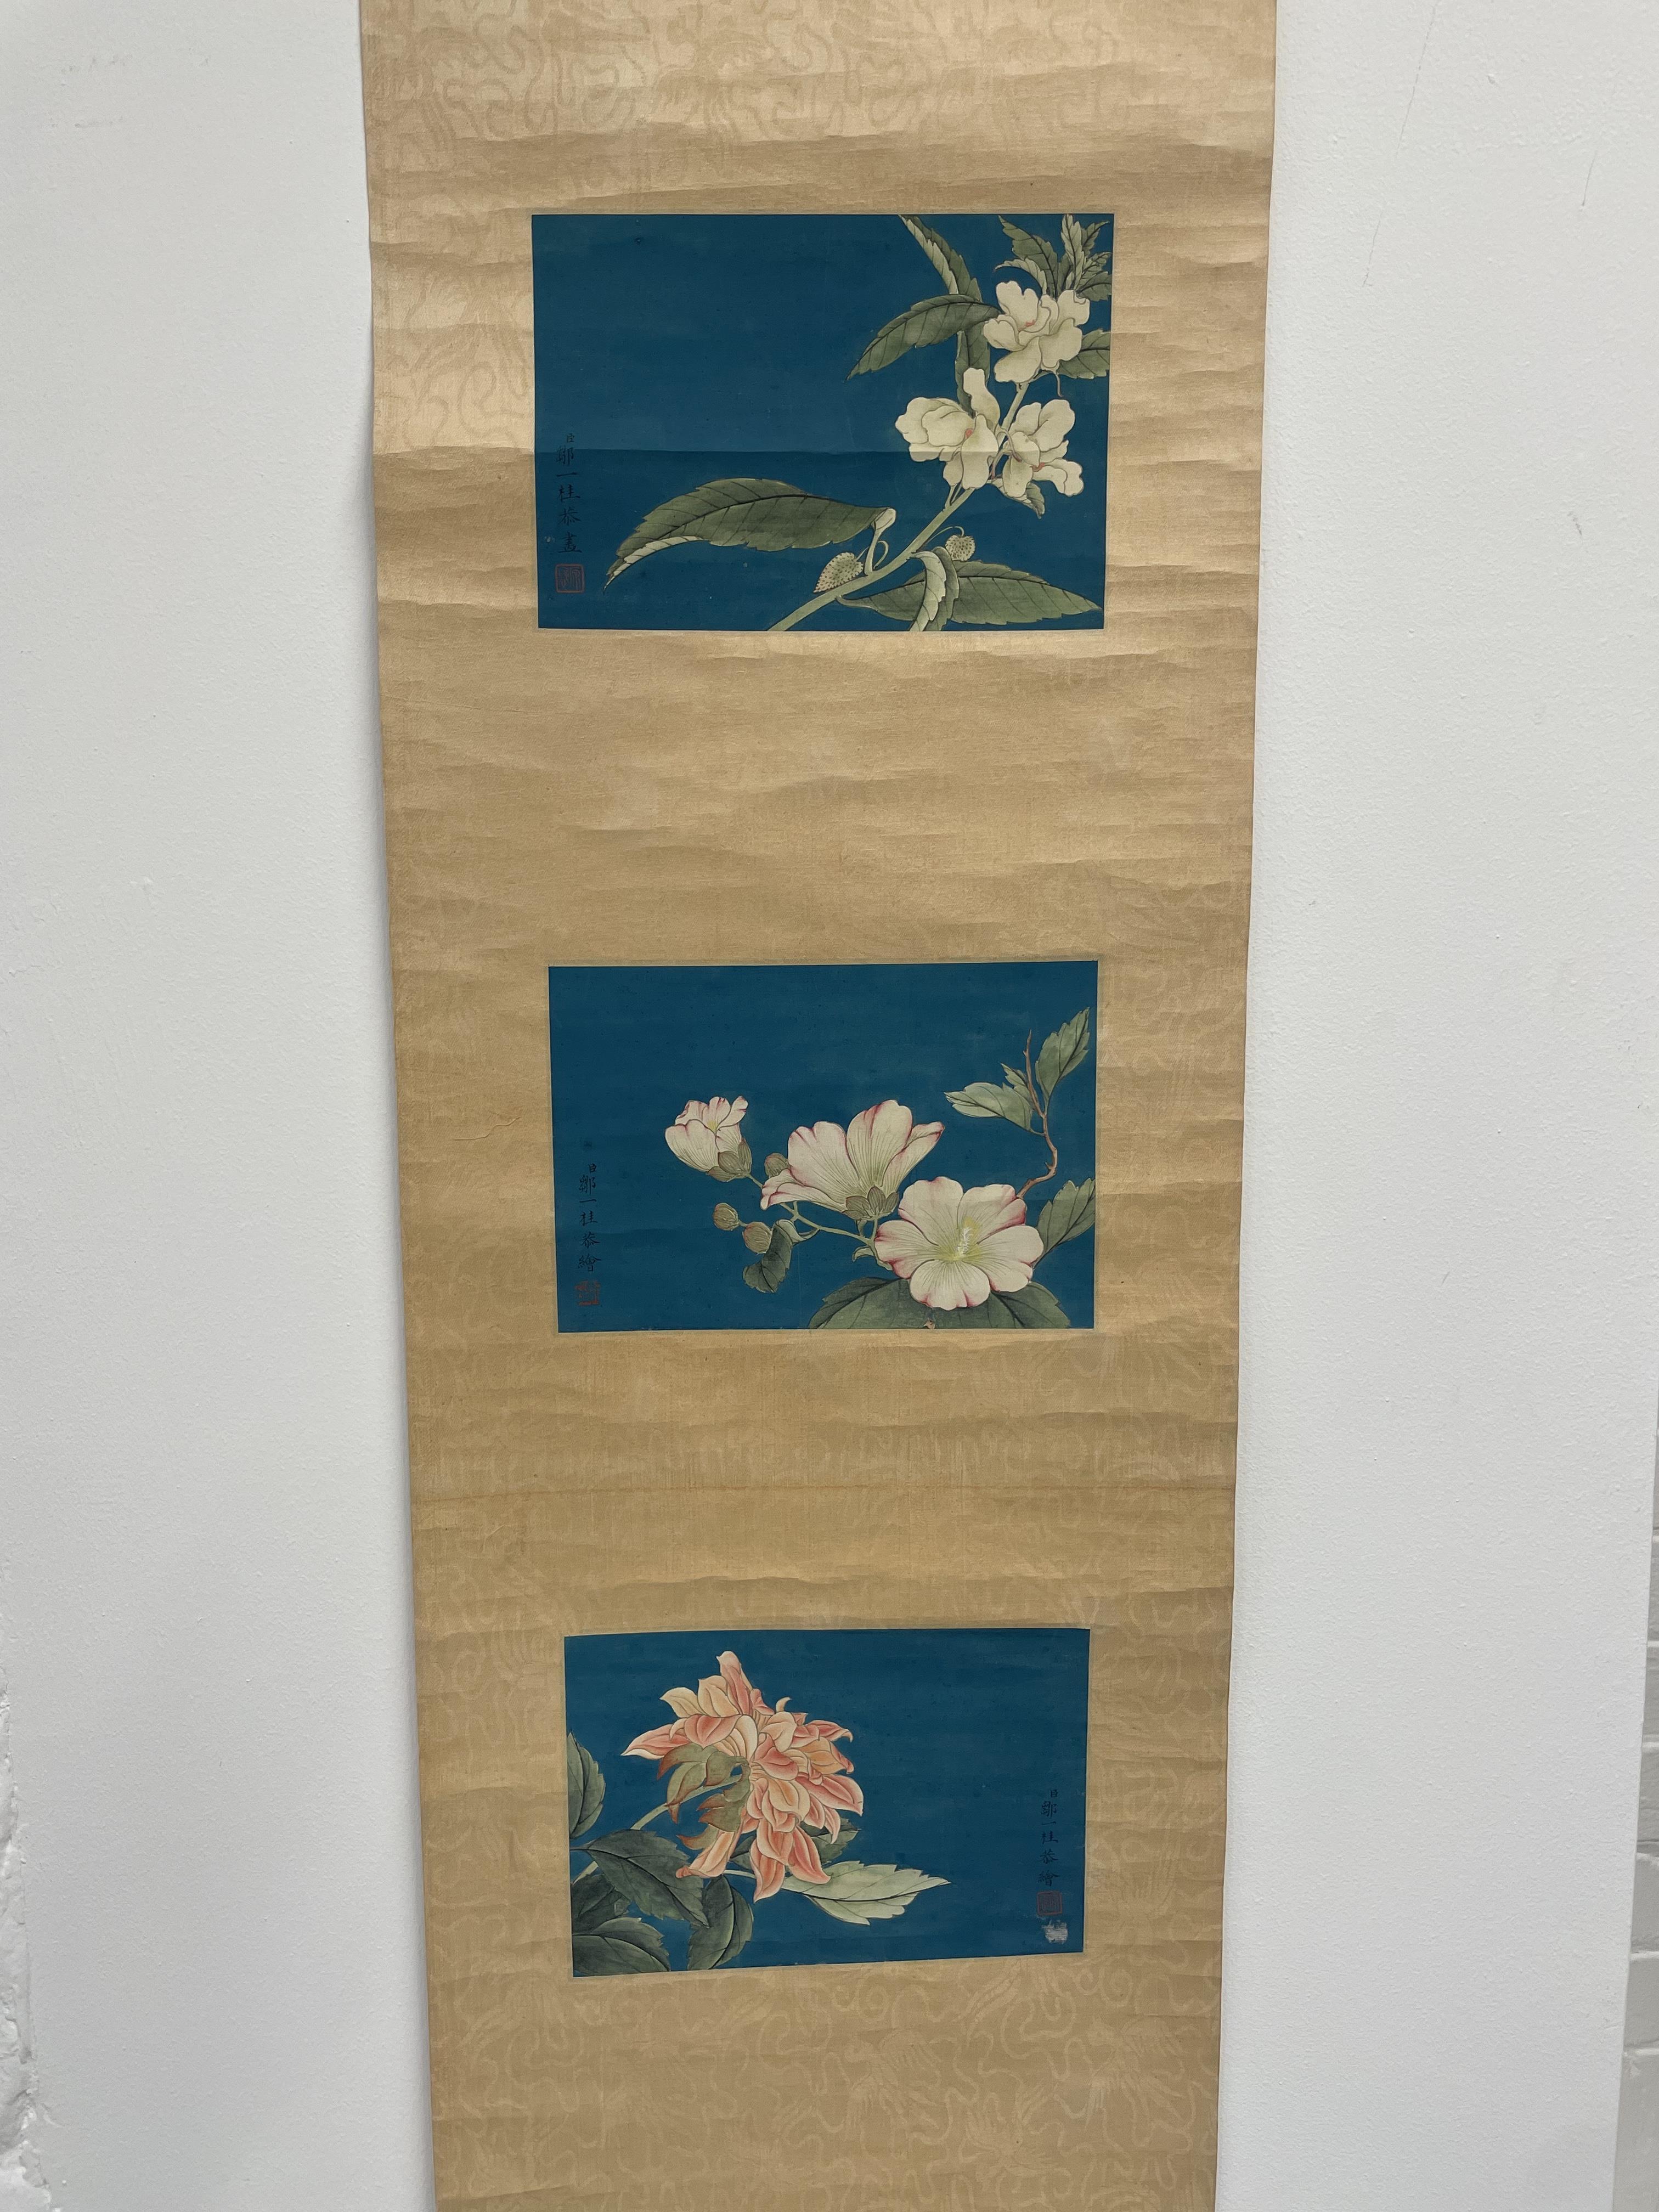 ZOU YIGUI 鄒一桂 (Wuxi, China, 1686 - 1772) Four flower paintings 花卉軸四件 - Image 17 of 17